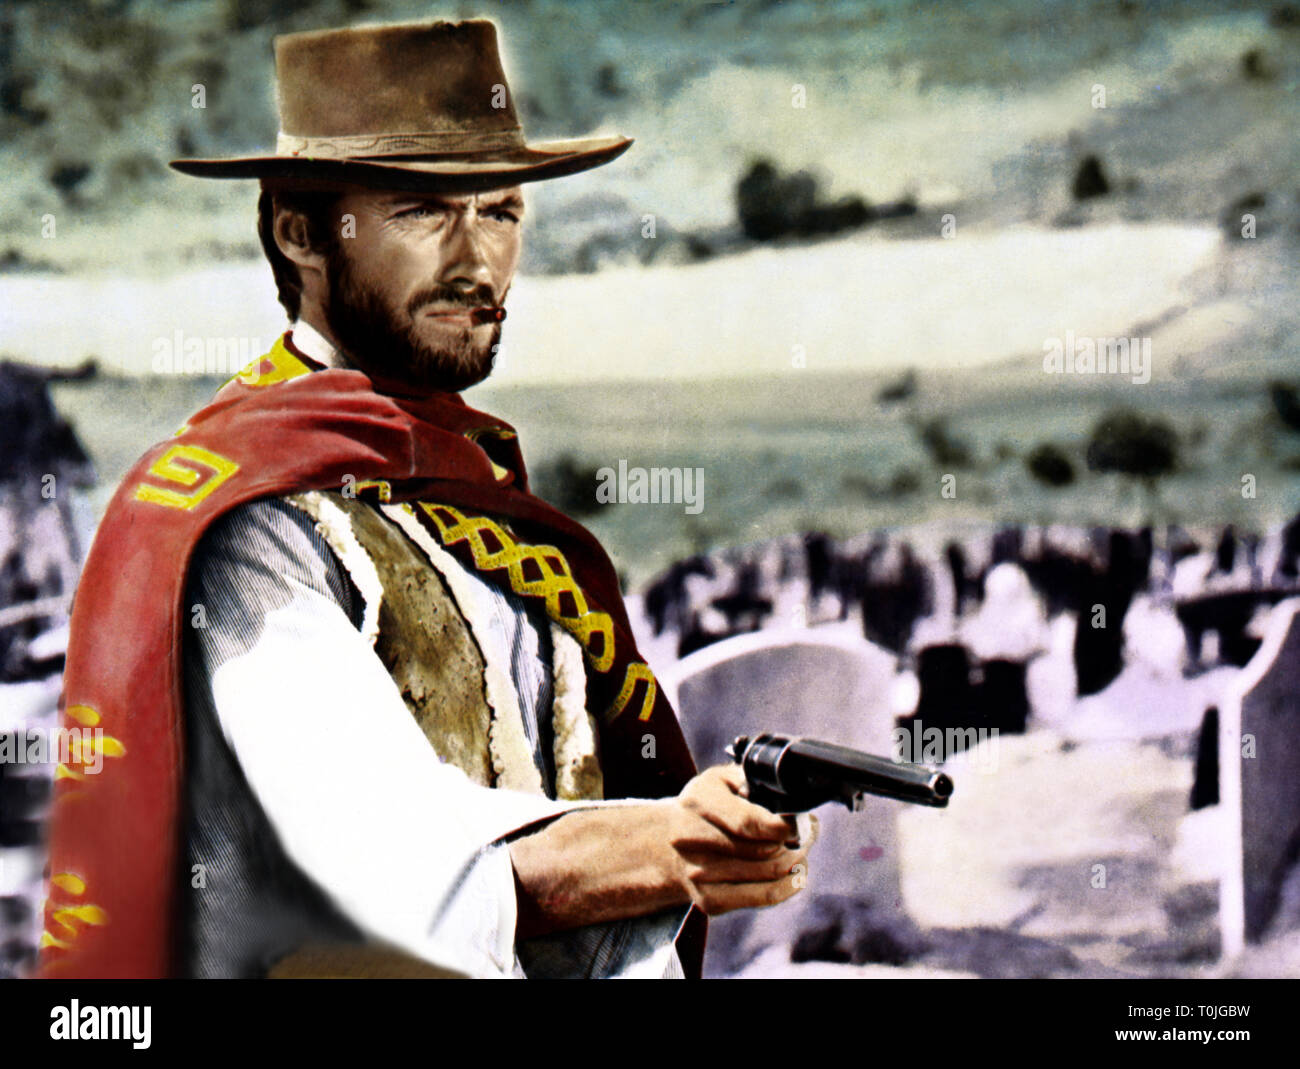 THE GOOD, THE BAD AND THE UGLY, CLINT EASTWOOD, 1966 Stock Photo